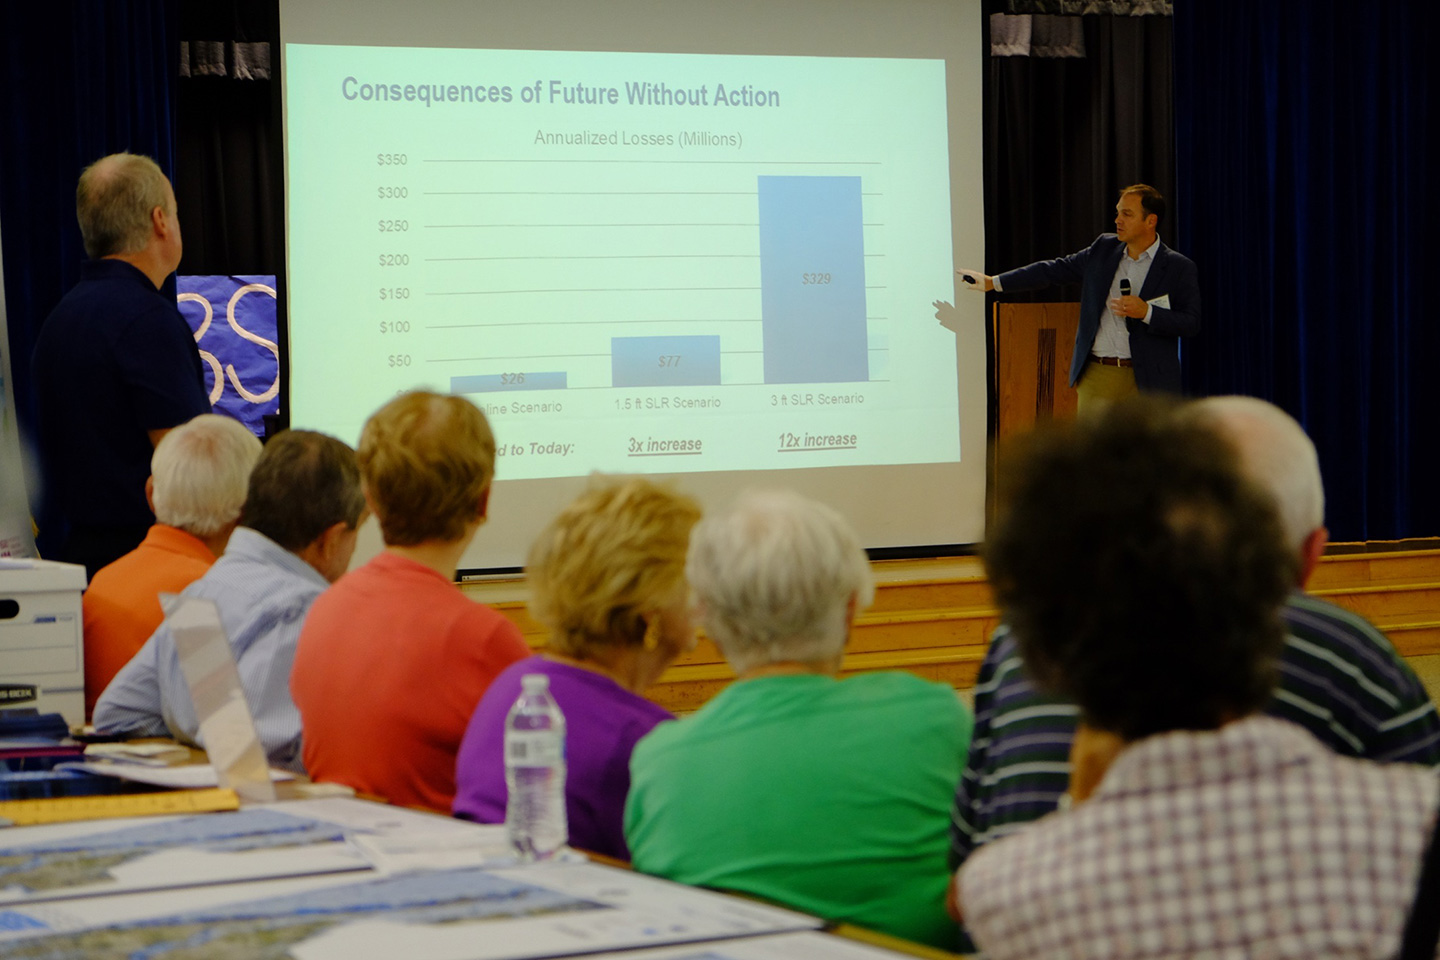 Brian Batten presenting on sea level rise impact projections and adaptation options to Virginia Beach residents.